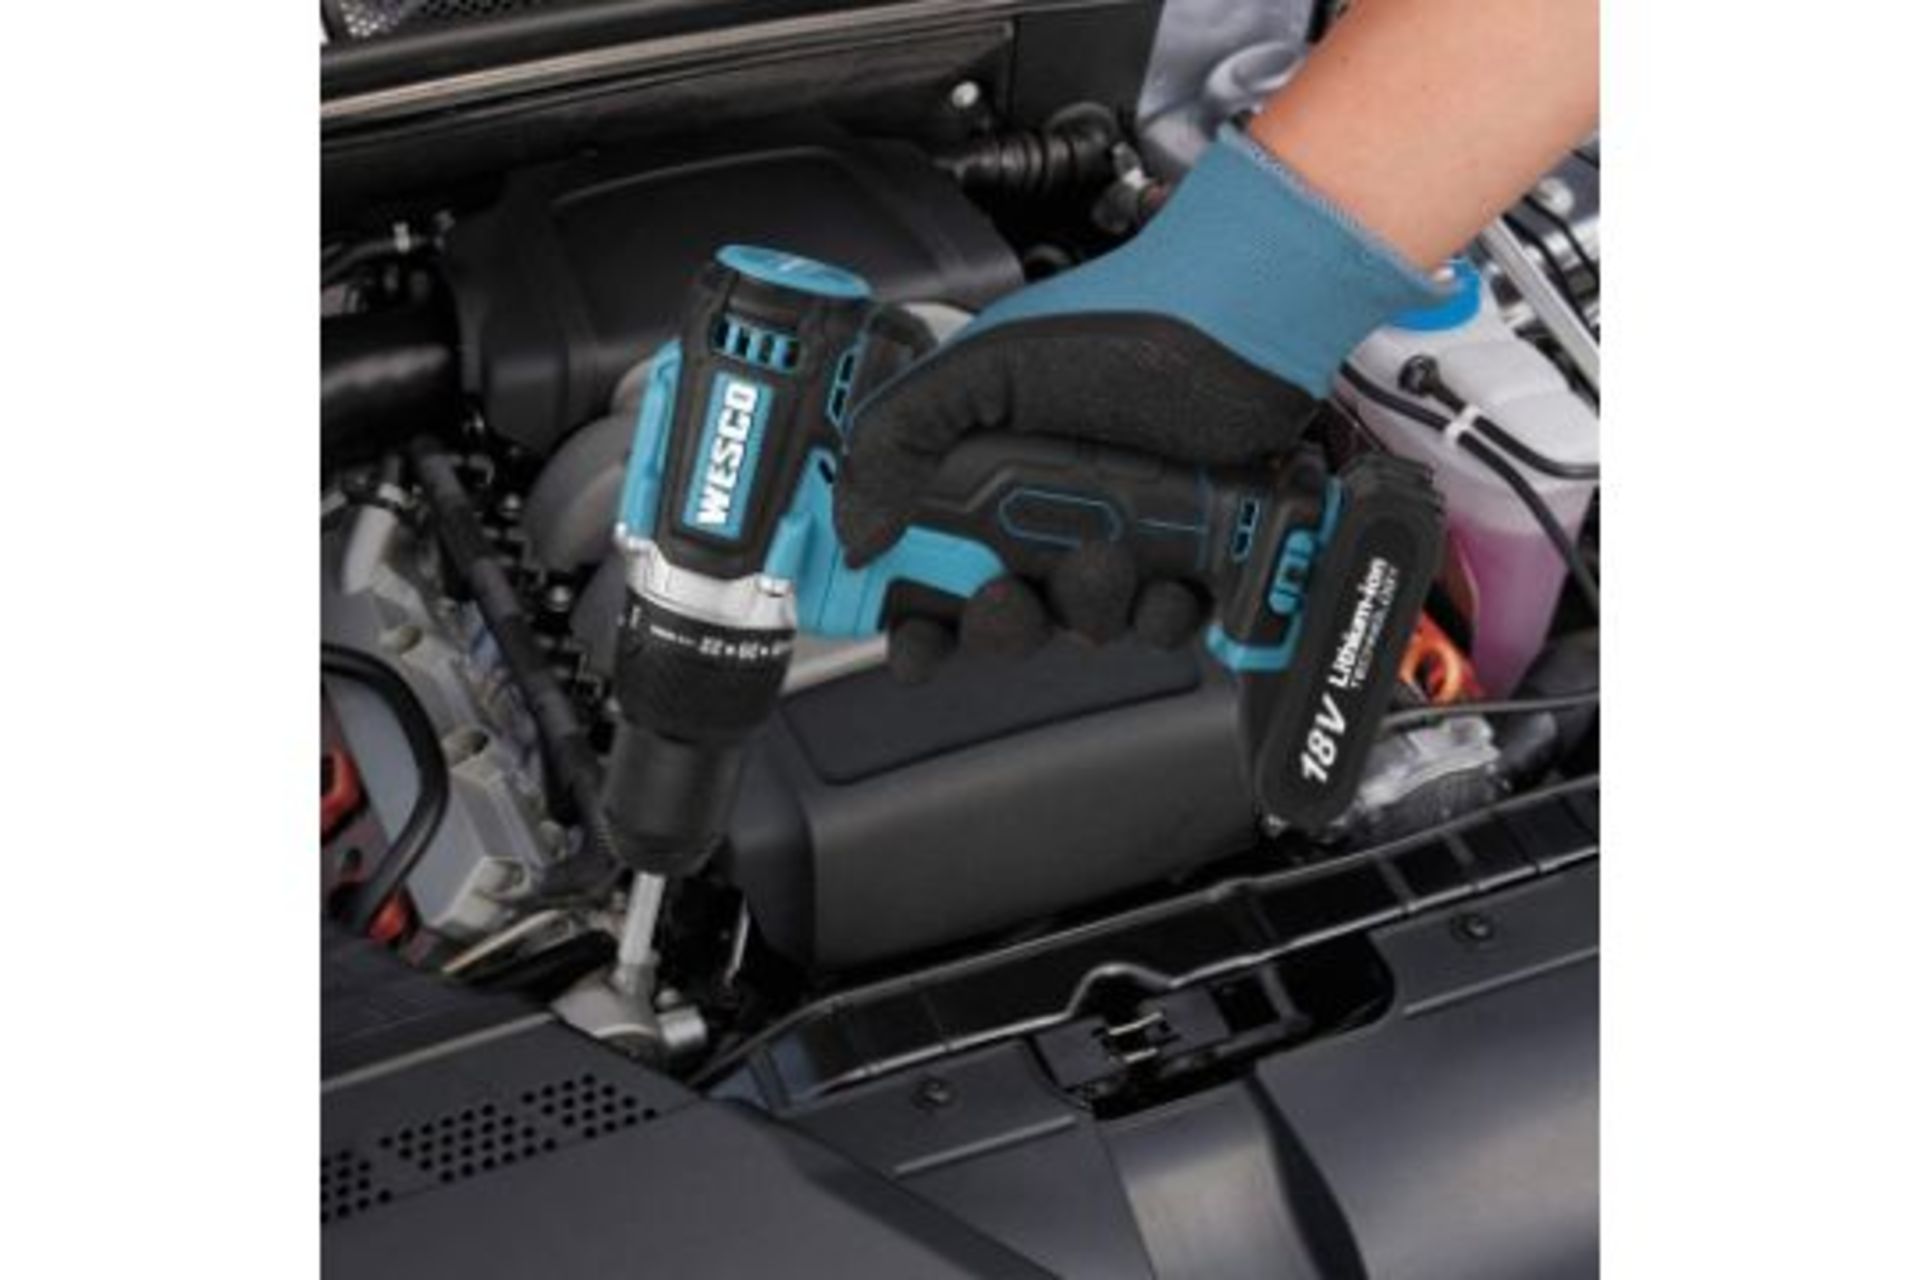 New Boxed WESCO 18V 2.0Ah Cordless Combi Drill with 13 Accessories, Hammer Drill Max Torque 60 N. - Image 3 of 3